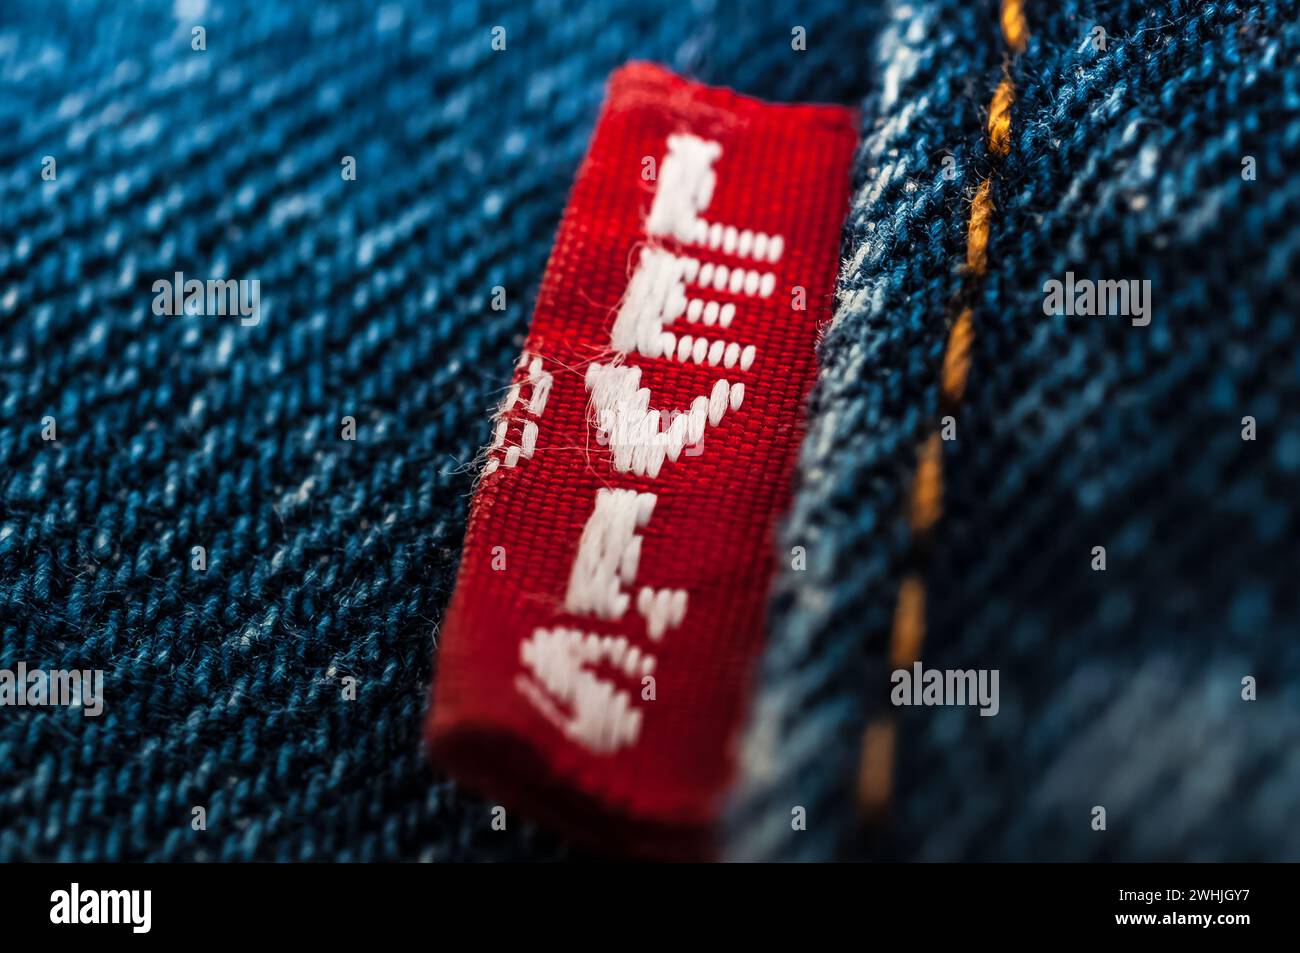 New LEVI'S jeans. LEVI'S is a brand name of Levi Strauss and Co, founded in 1853 Stock Photo